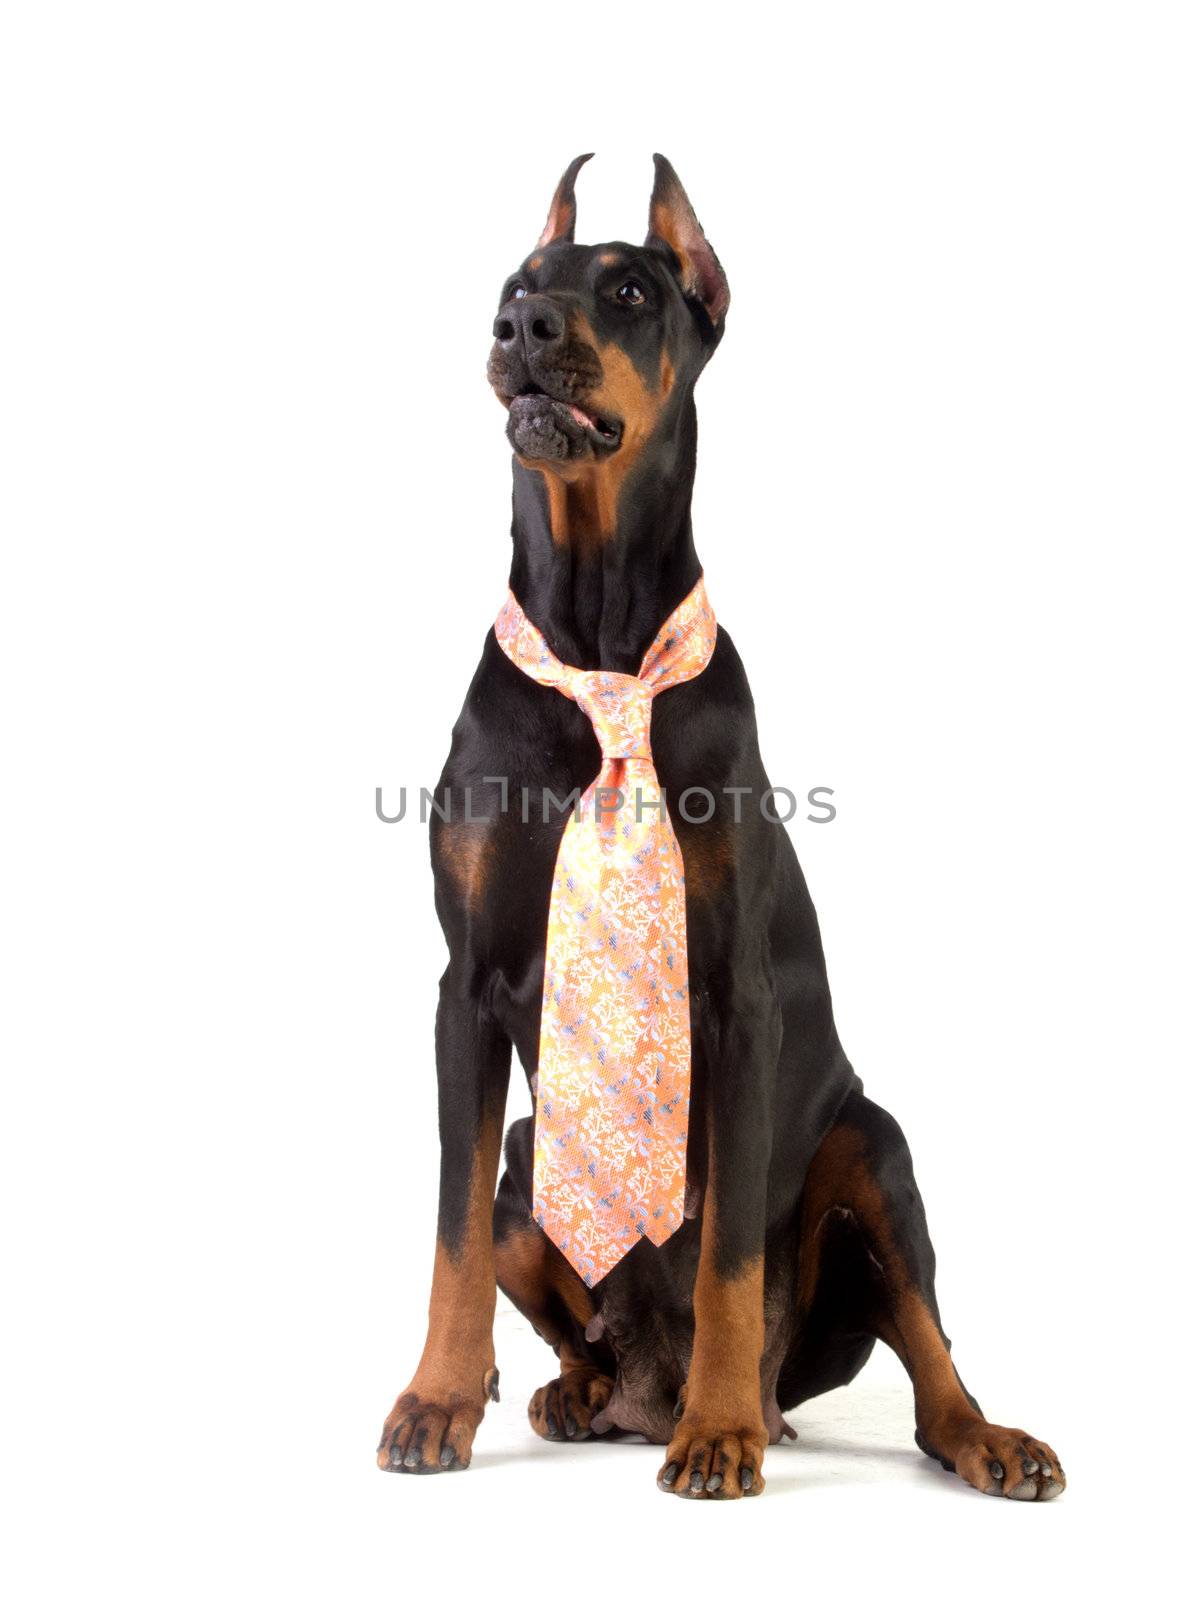 Grate doberman dog on white background wearing a tie